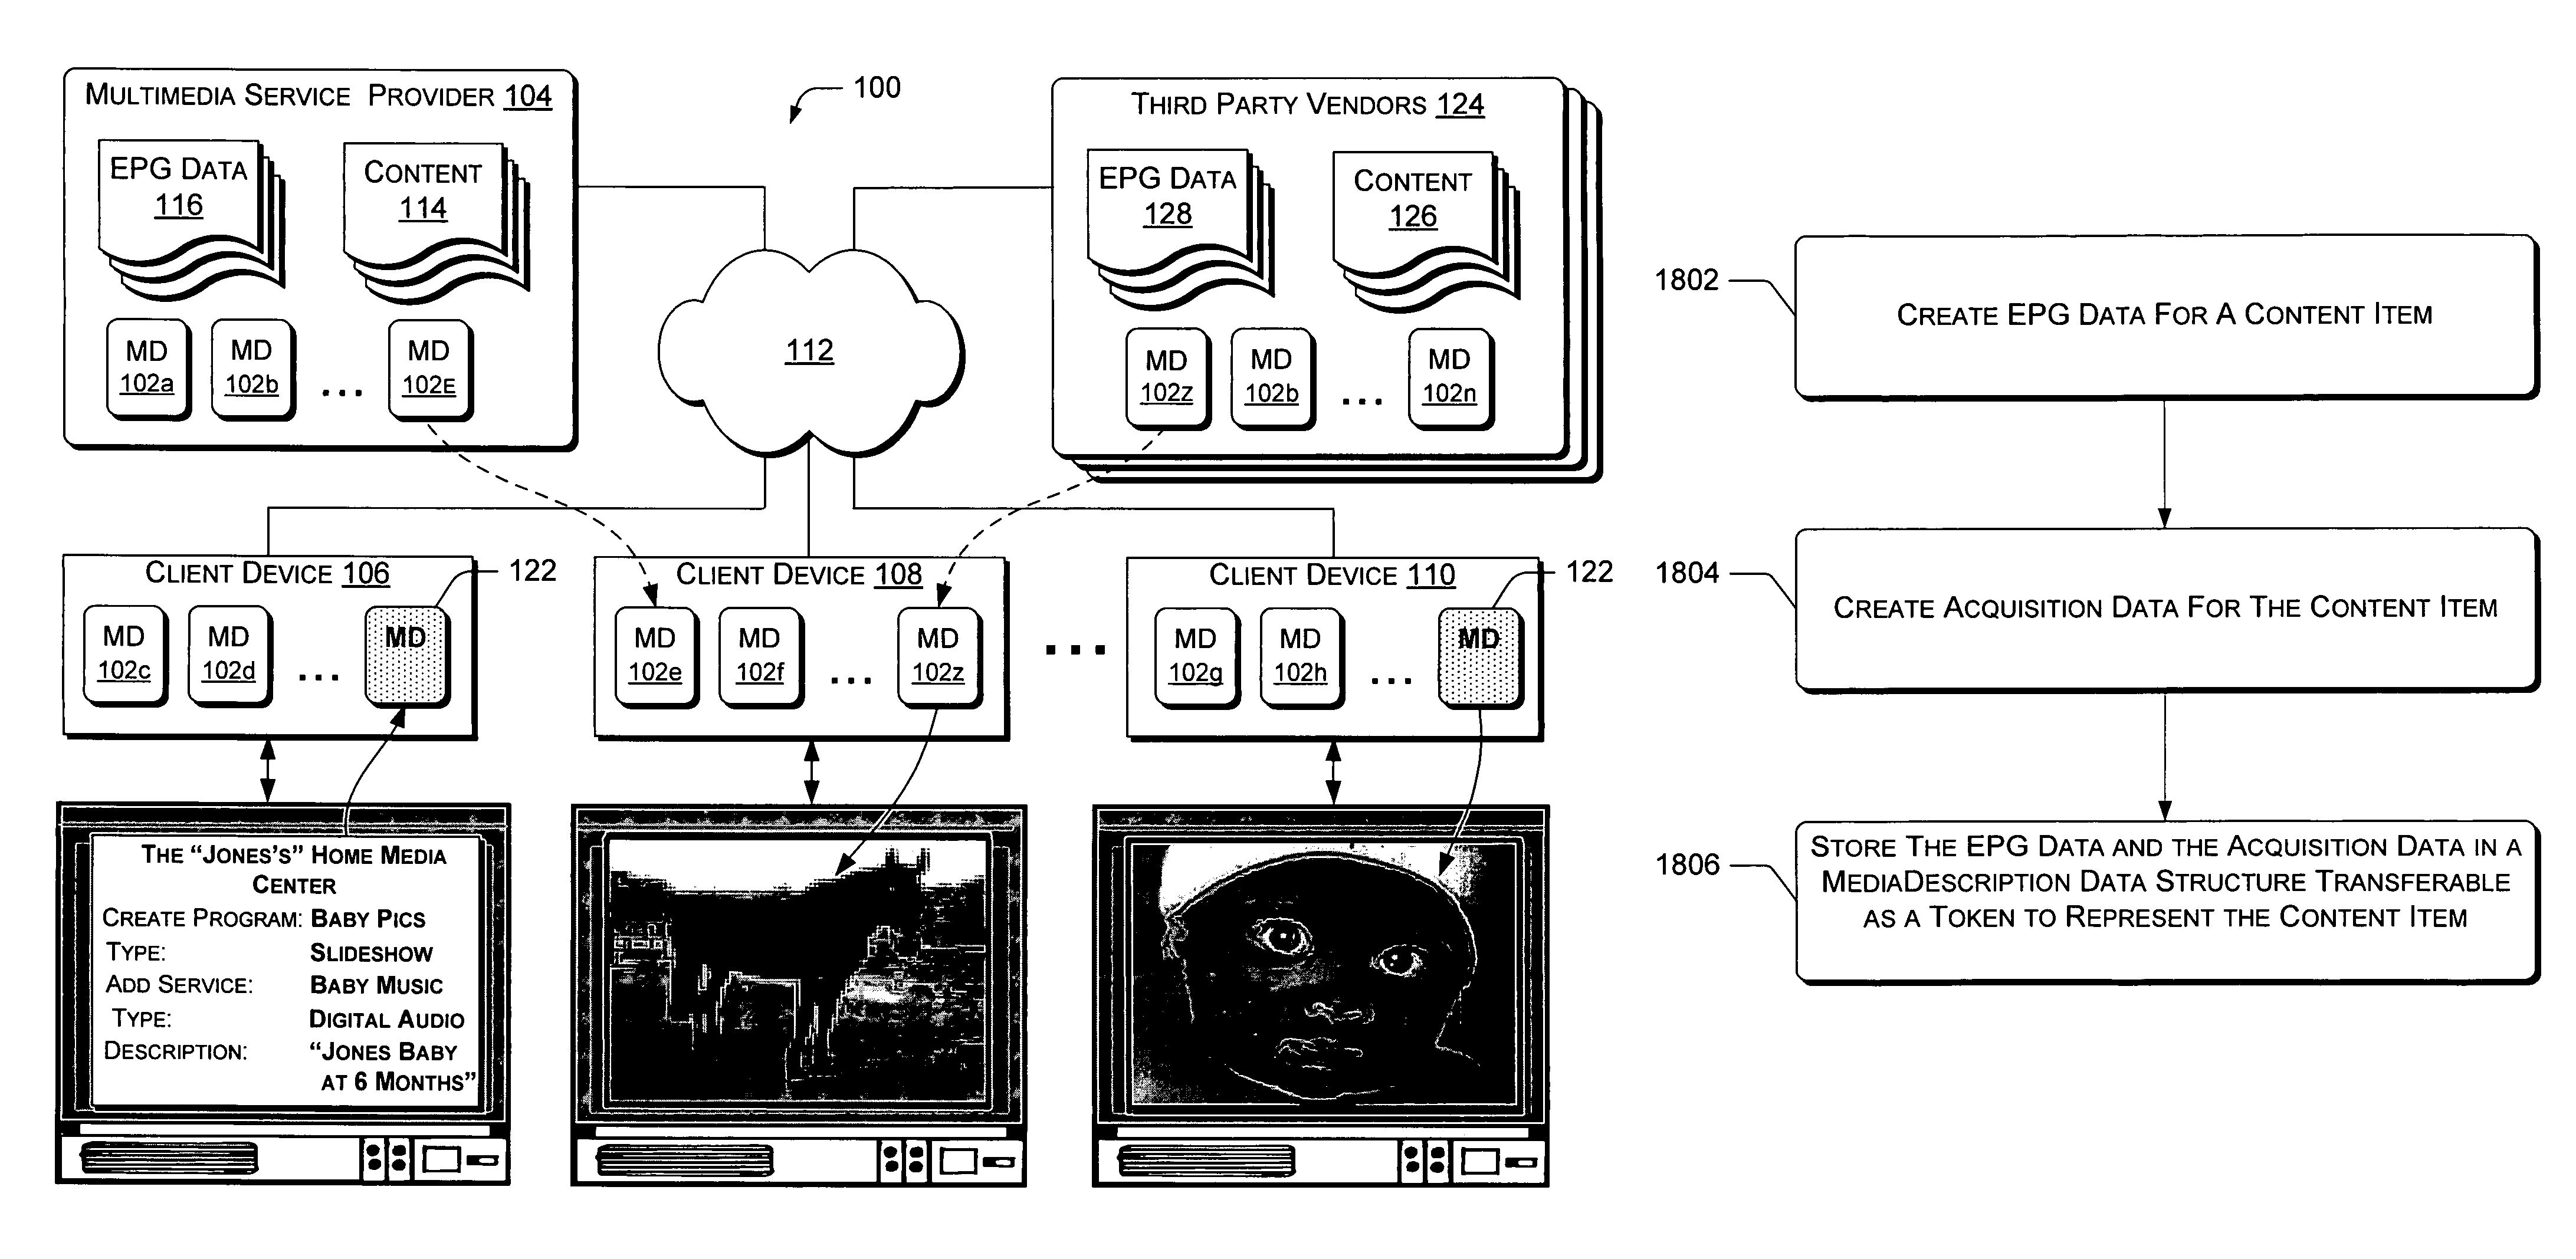 MediaDescription data structures for carrying descriptive content metadata and content acquisition data in multimedia systems